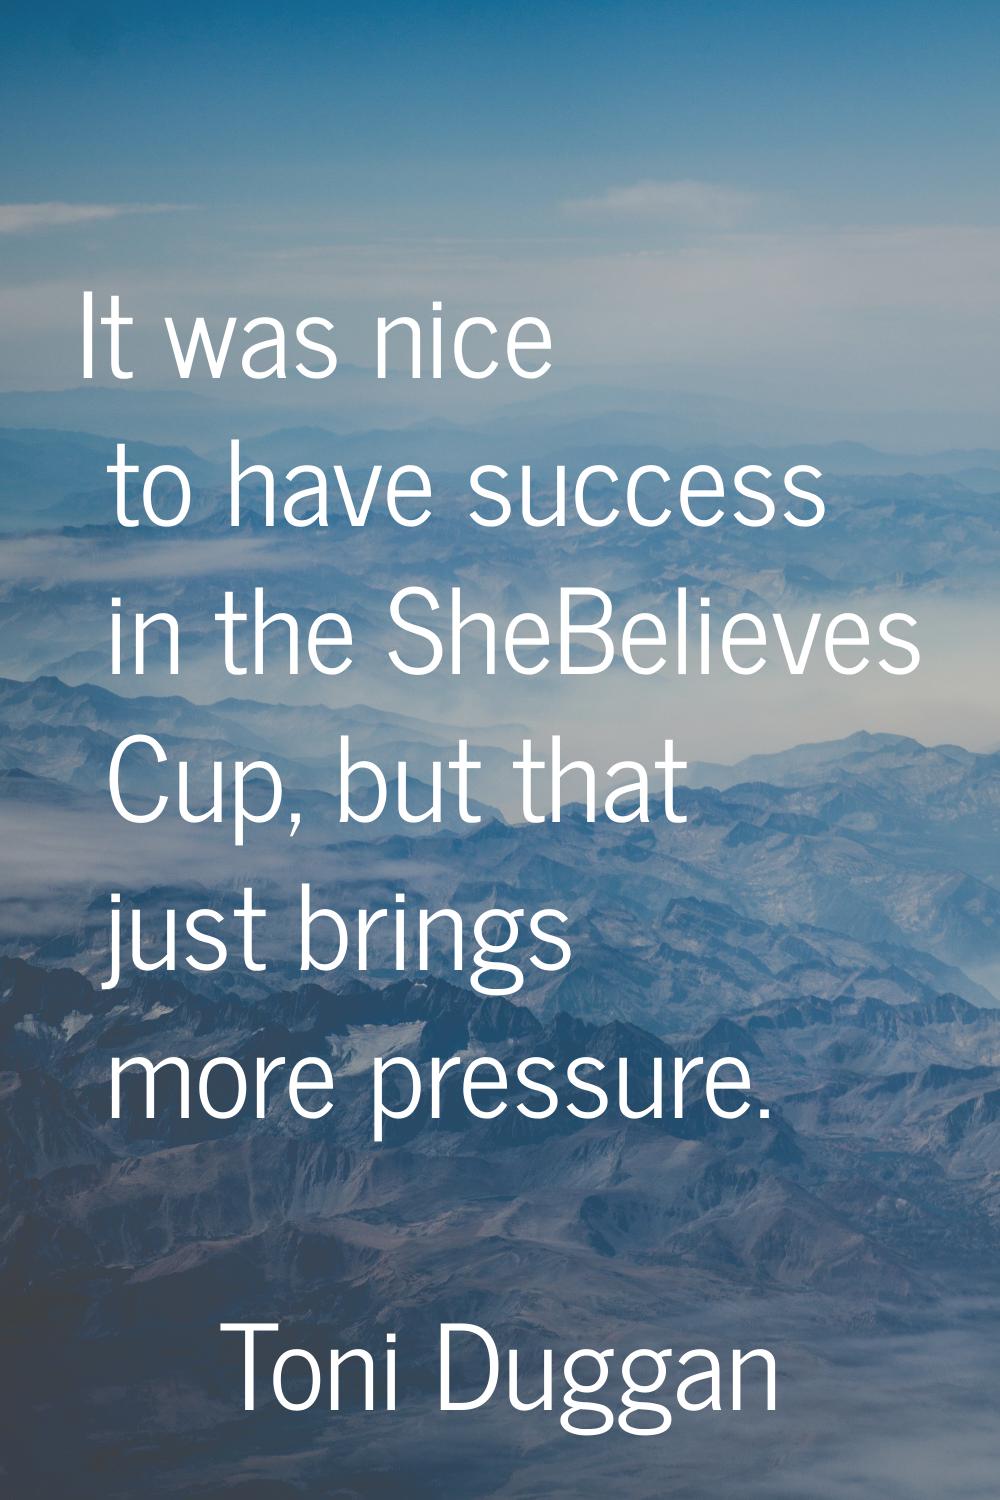 It was nice to have success in the SheBelieves Cup, but that just brings more pressure.